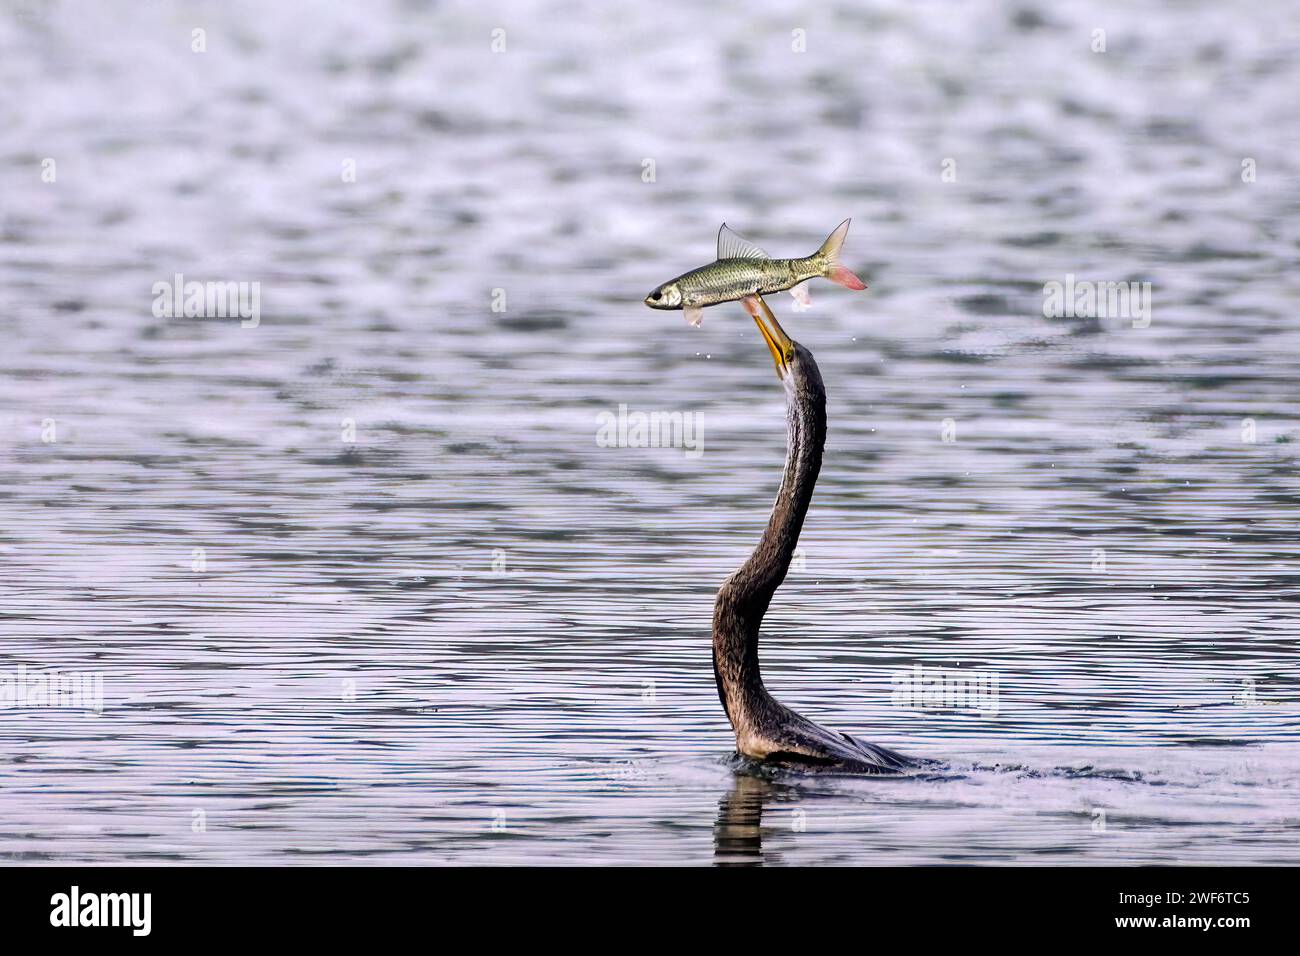 A Darter bird catching fish in Keoladeo National Park, Rajasthan, India. Stock Photo